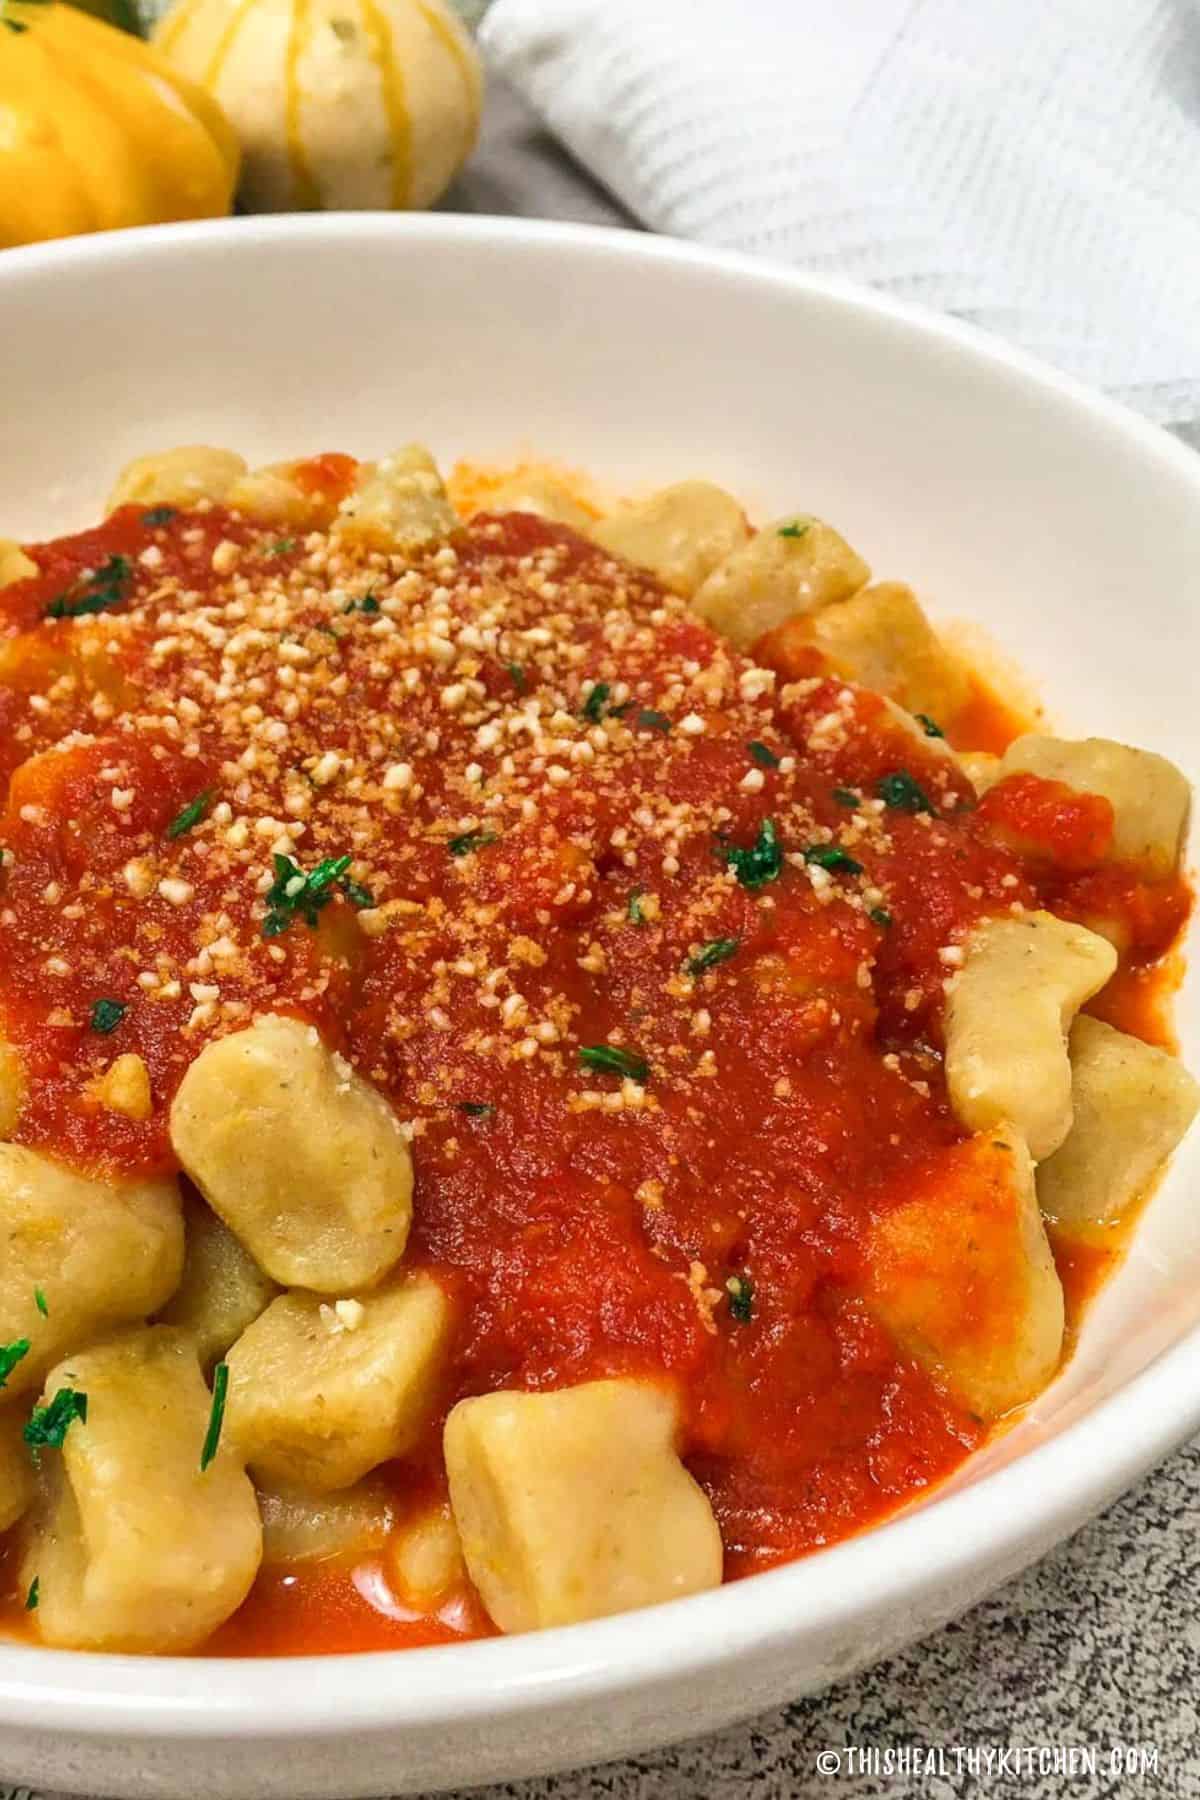 Pumpkin gnocchi with red tomato sauce and parsley on top.